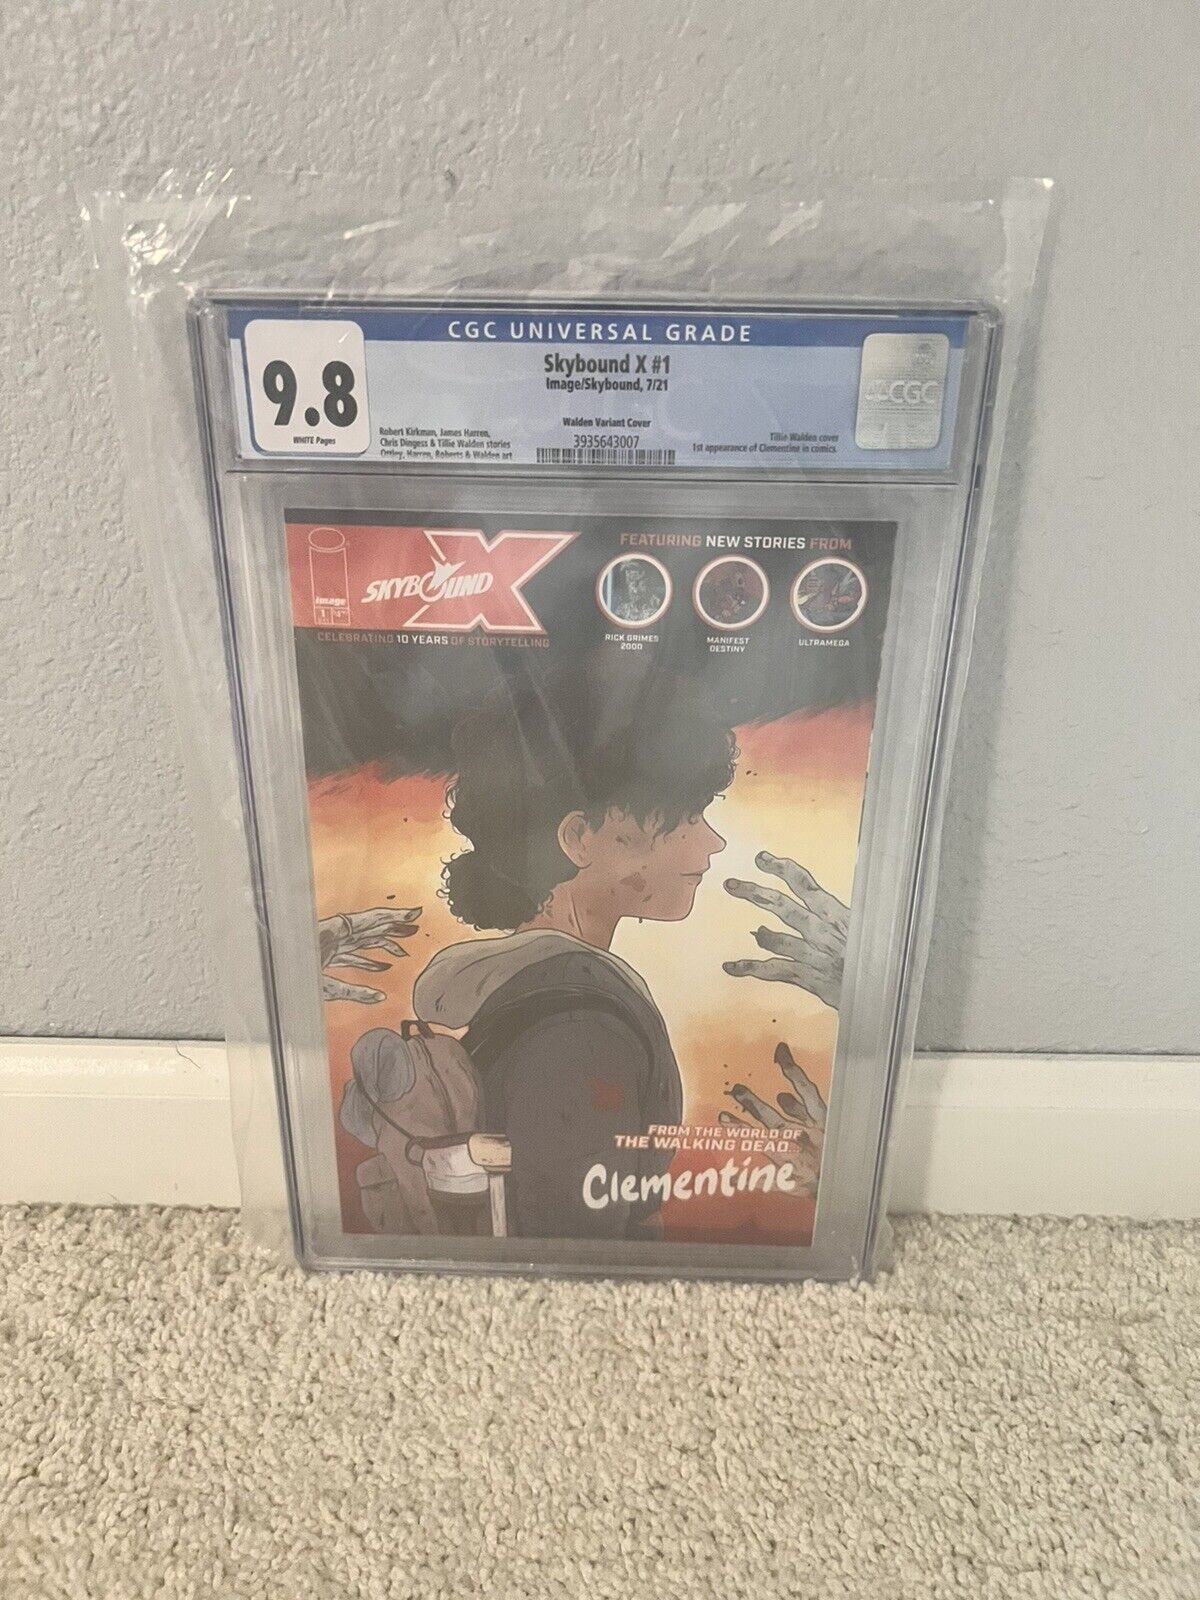 Skybound X #1 Variant CGC 9.8 First Appearance CLEMENTINE Walking Dead image NM